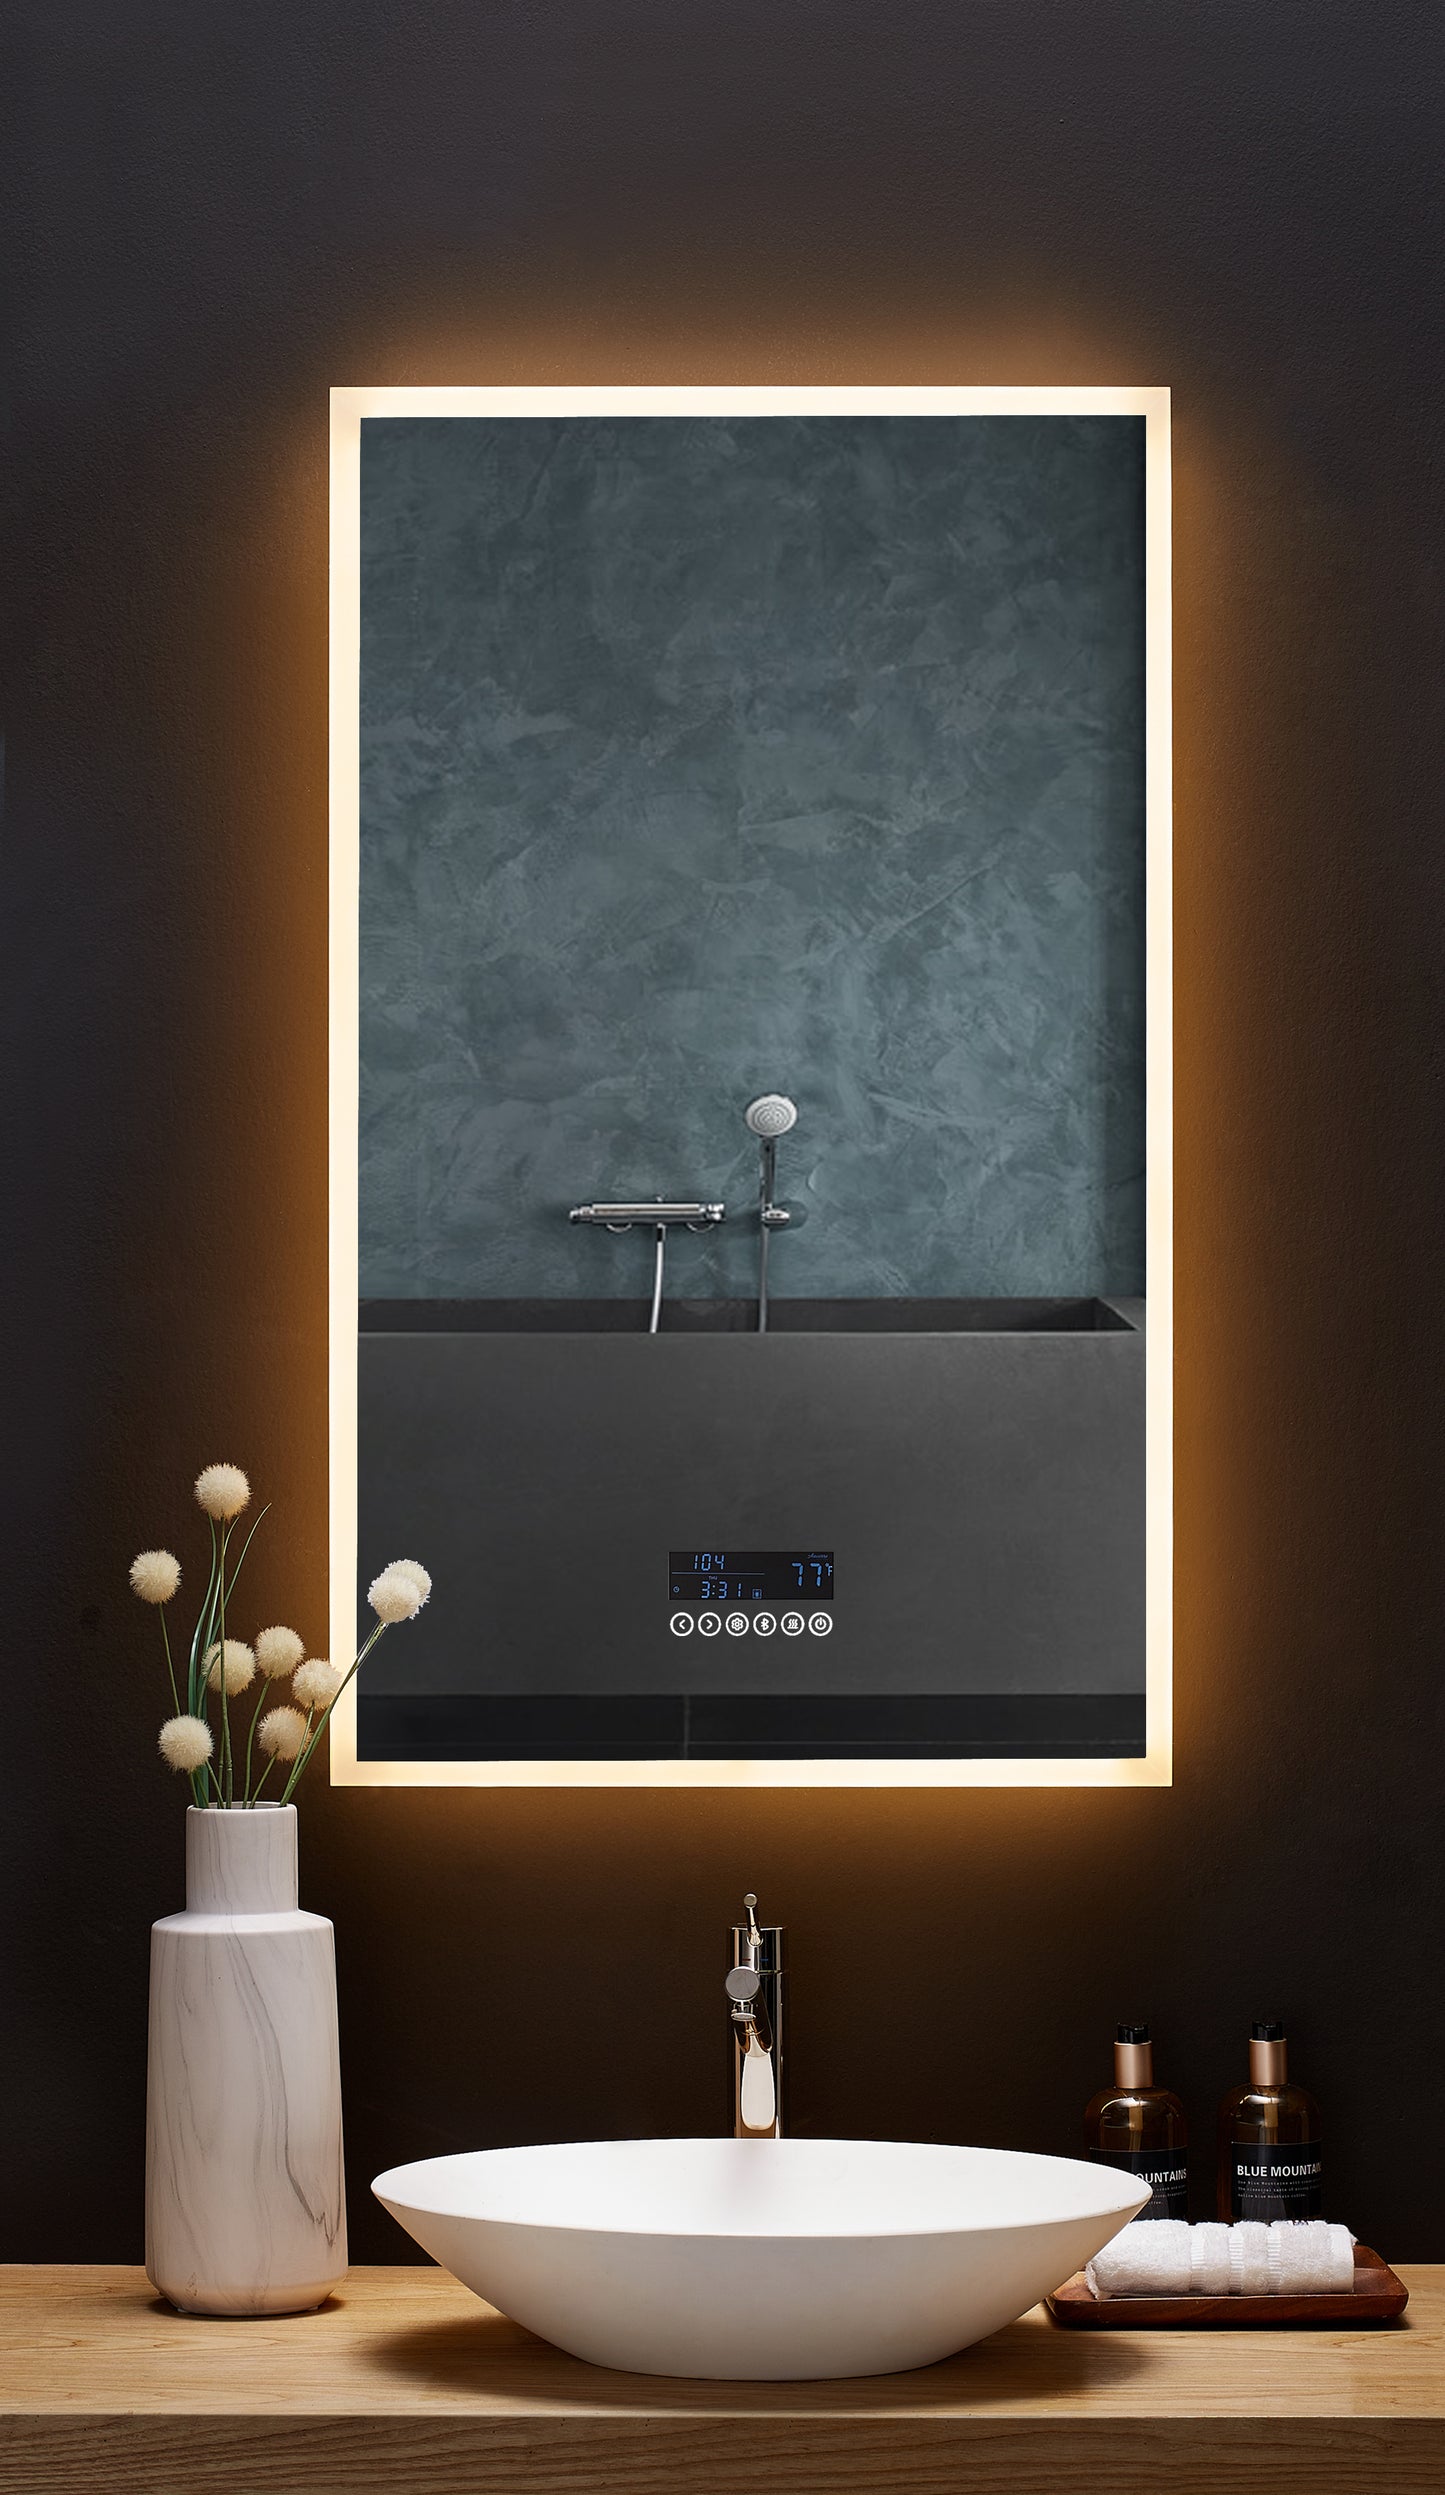 IMMERSION 24 in. x 40 in. LED Frameless Mirror with Bluetooth, Defogger and Digital Display